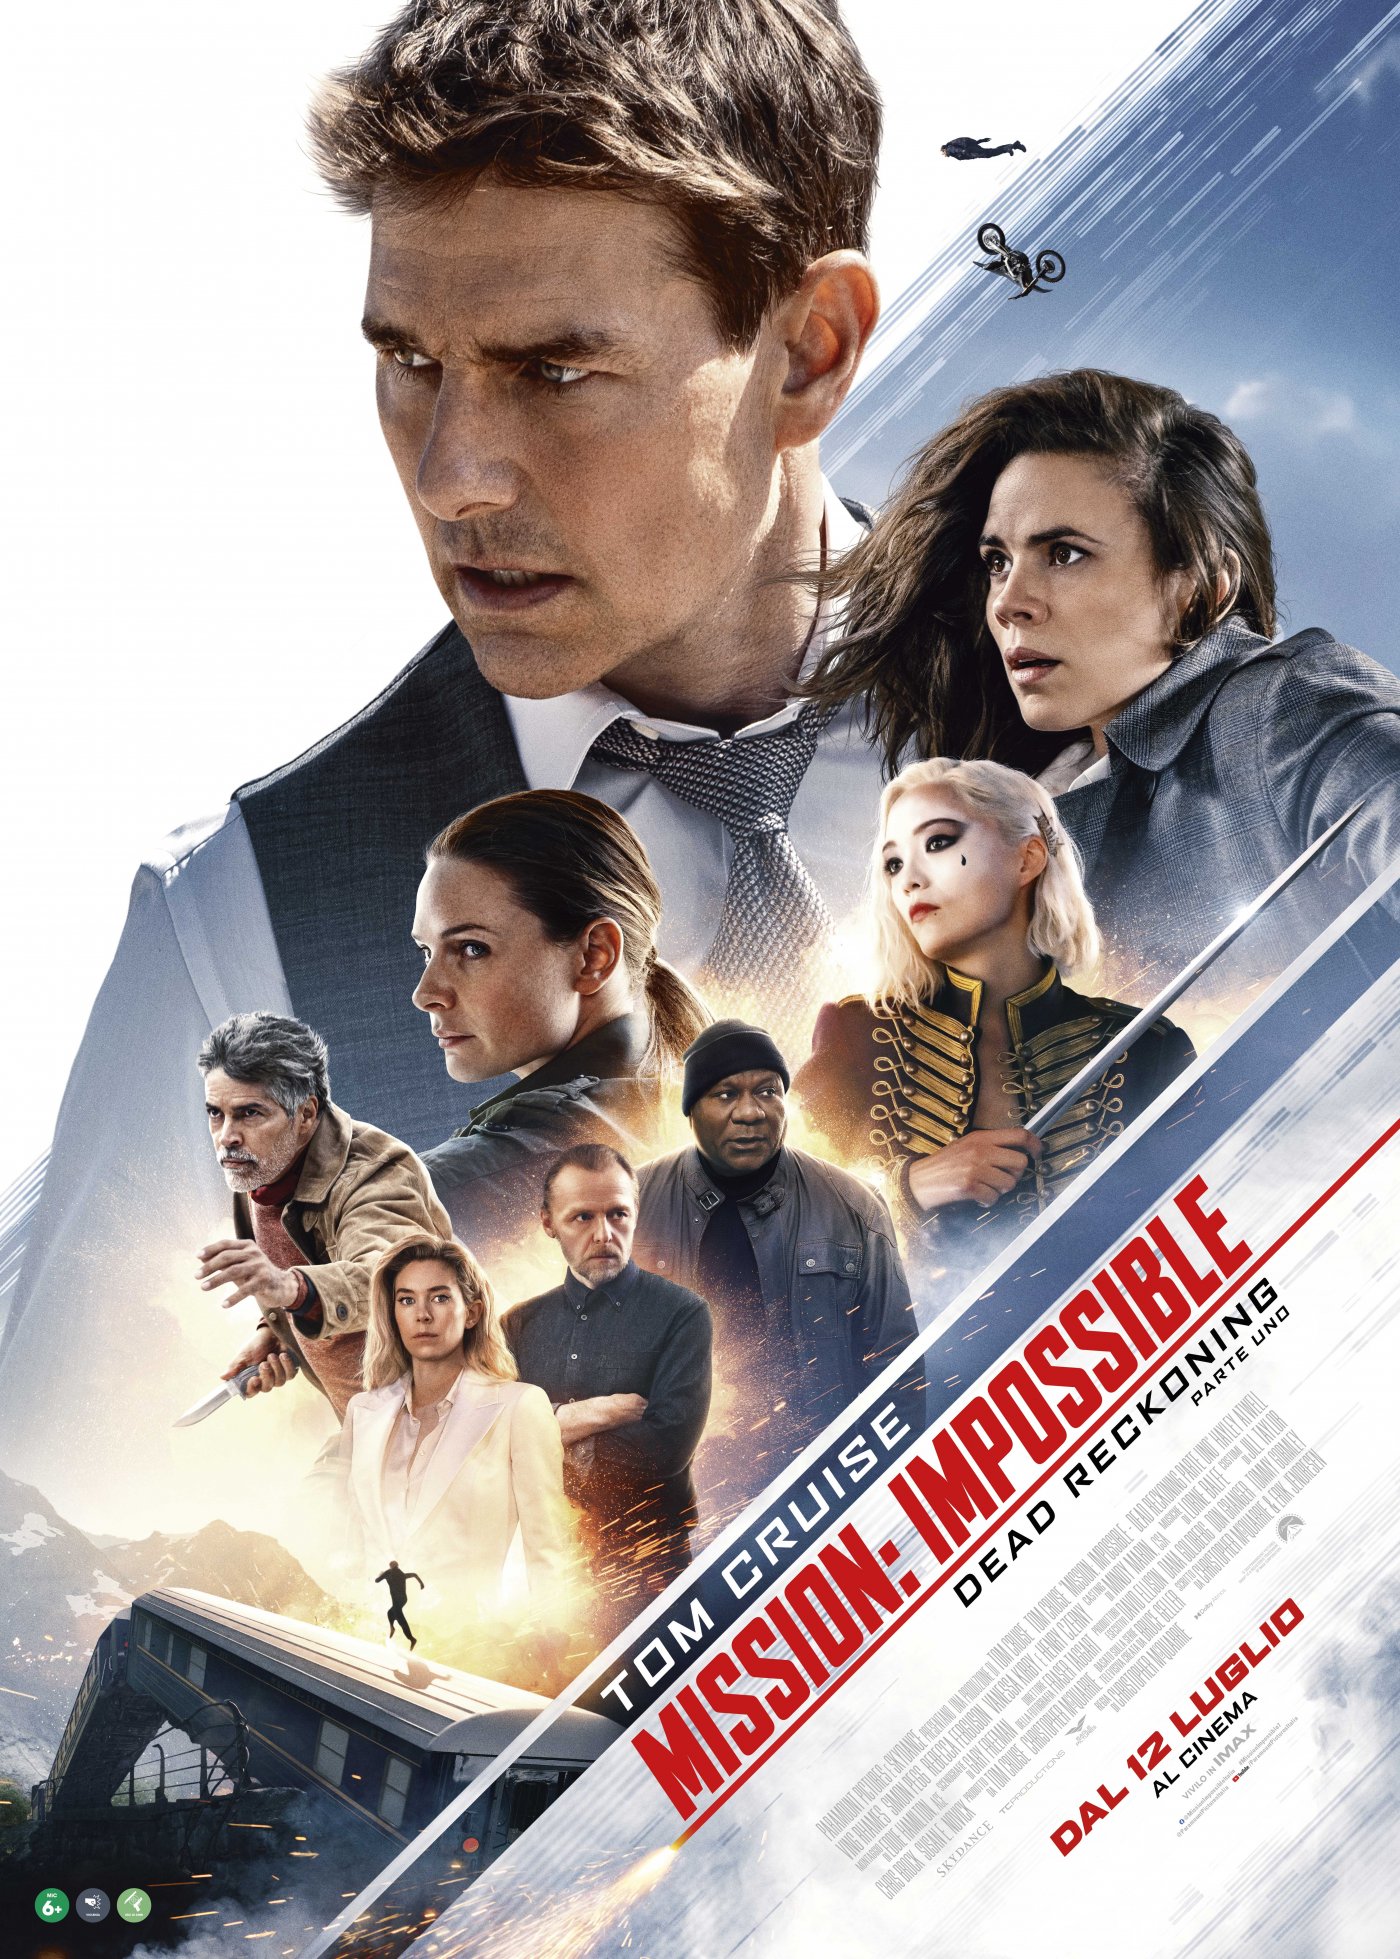 https://movieplayer.it/film/mission-impossible-dead-reckoning-part-one_51829/